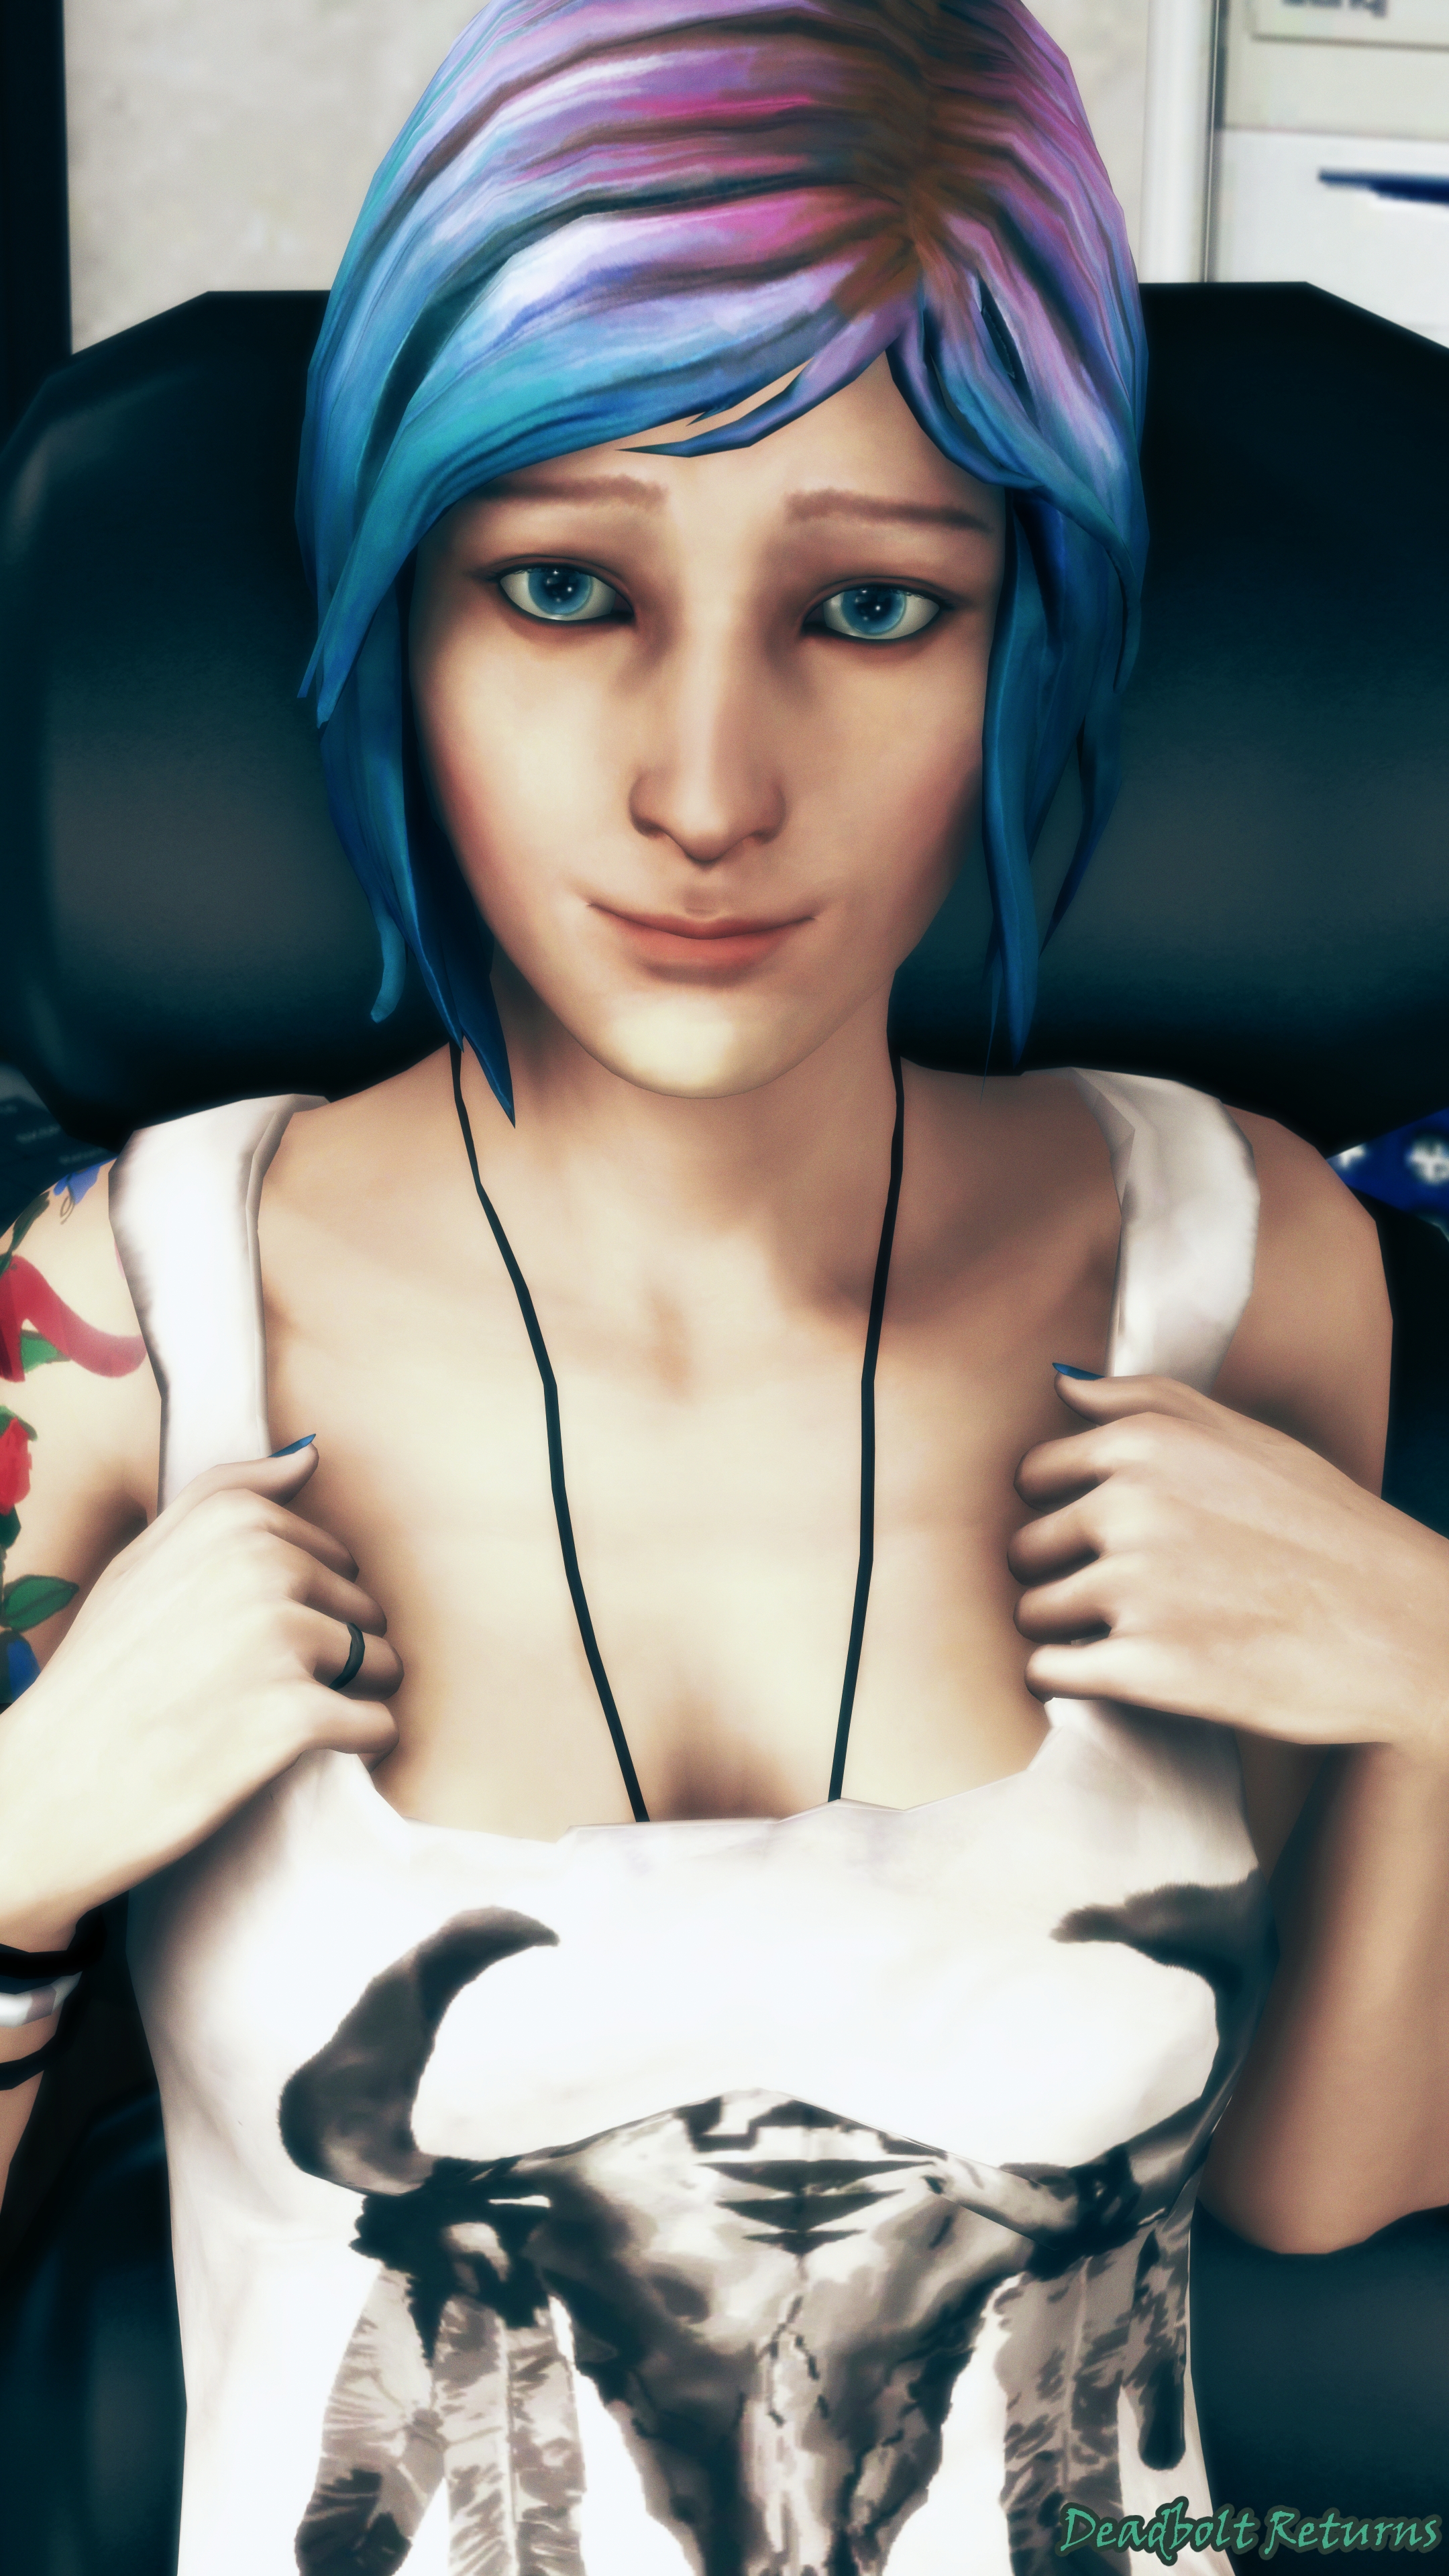 Chloe Price Returns to the Casting Couch Chloe Price Chloe Life Is Strange Sfm Source Filmmaker Rule34 Rule 34 3d Porn 3d Girl 3dnsfw Nsfw Casting Couch 2